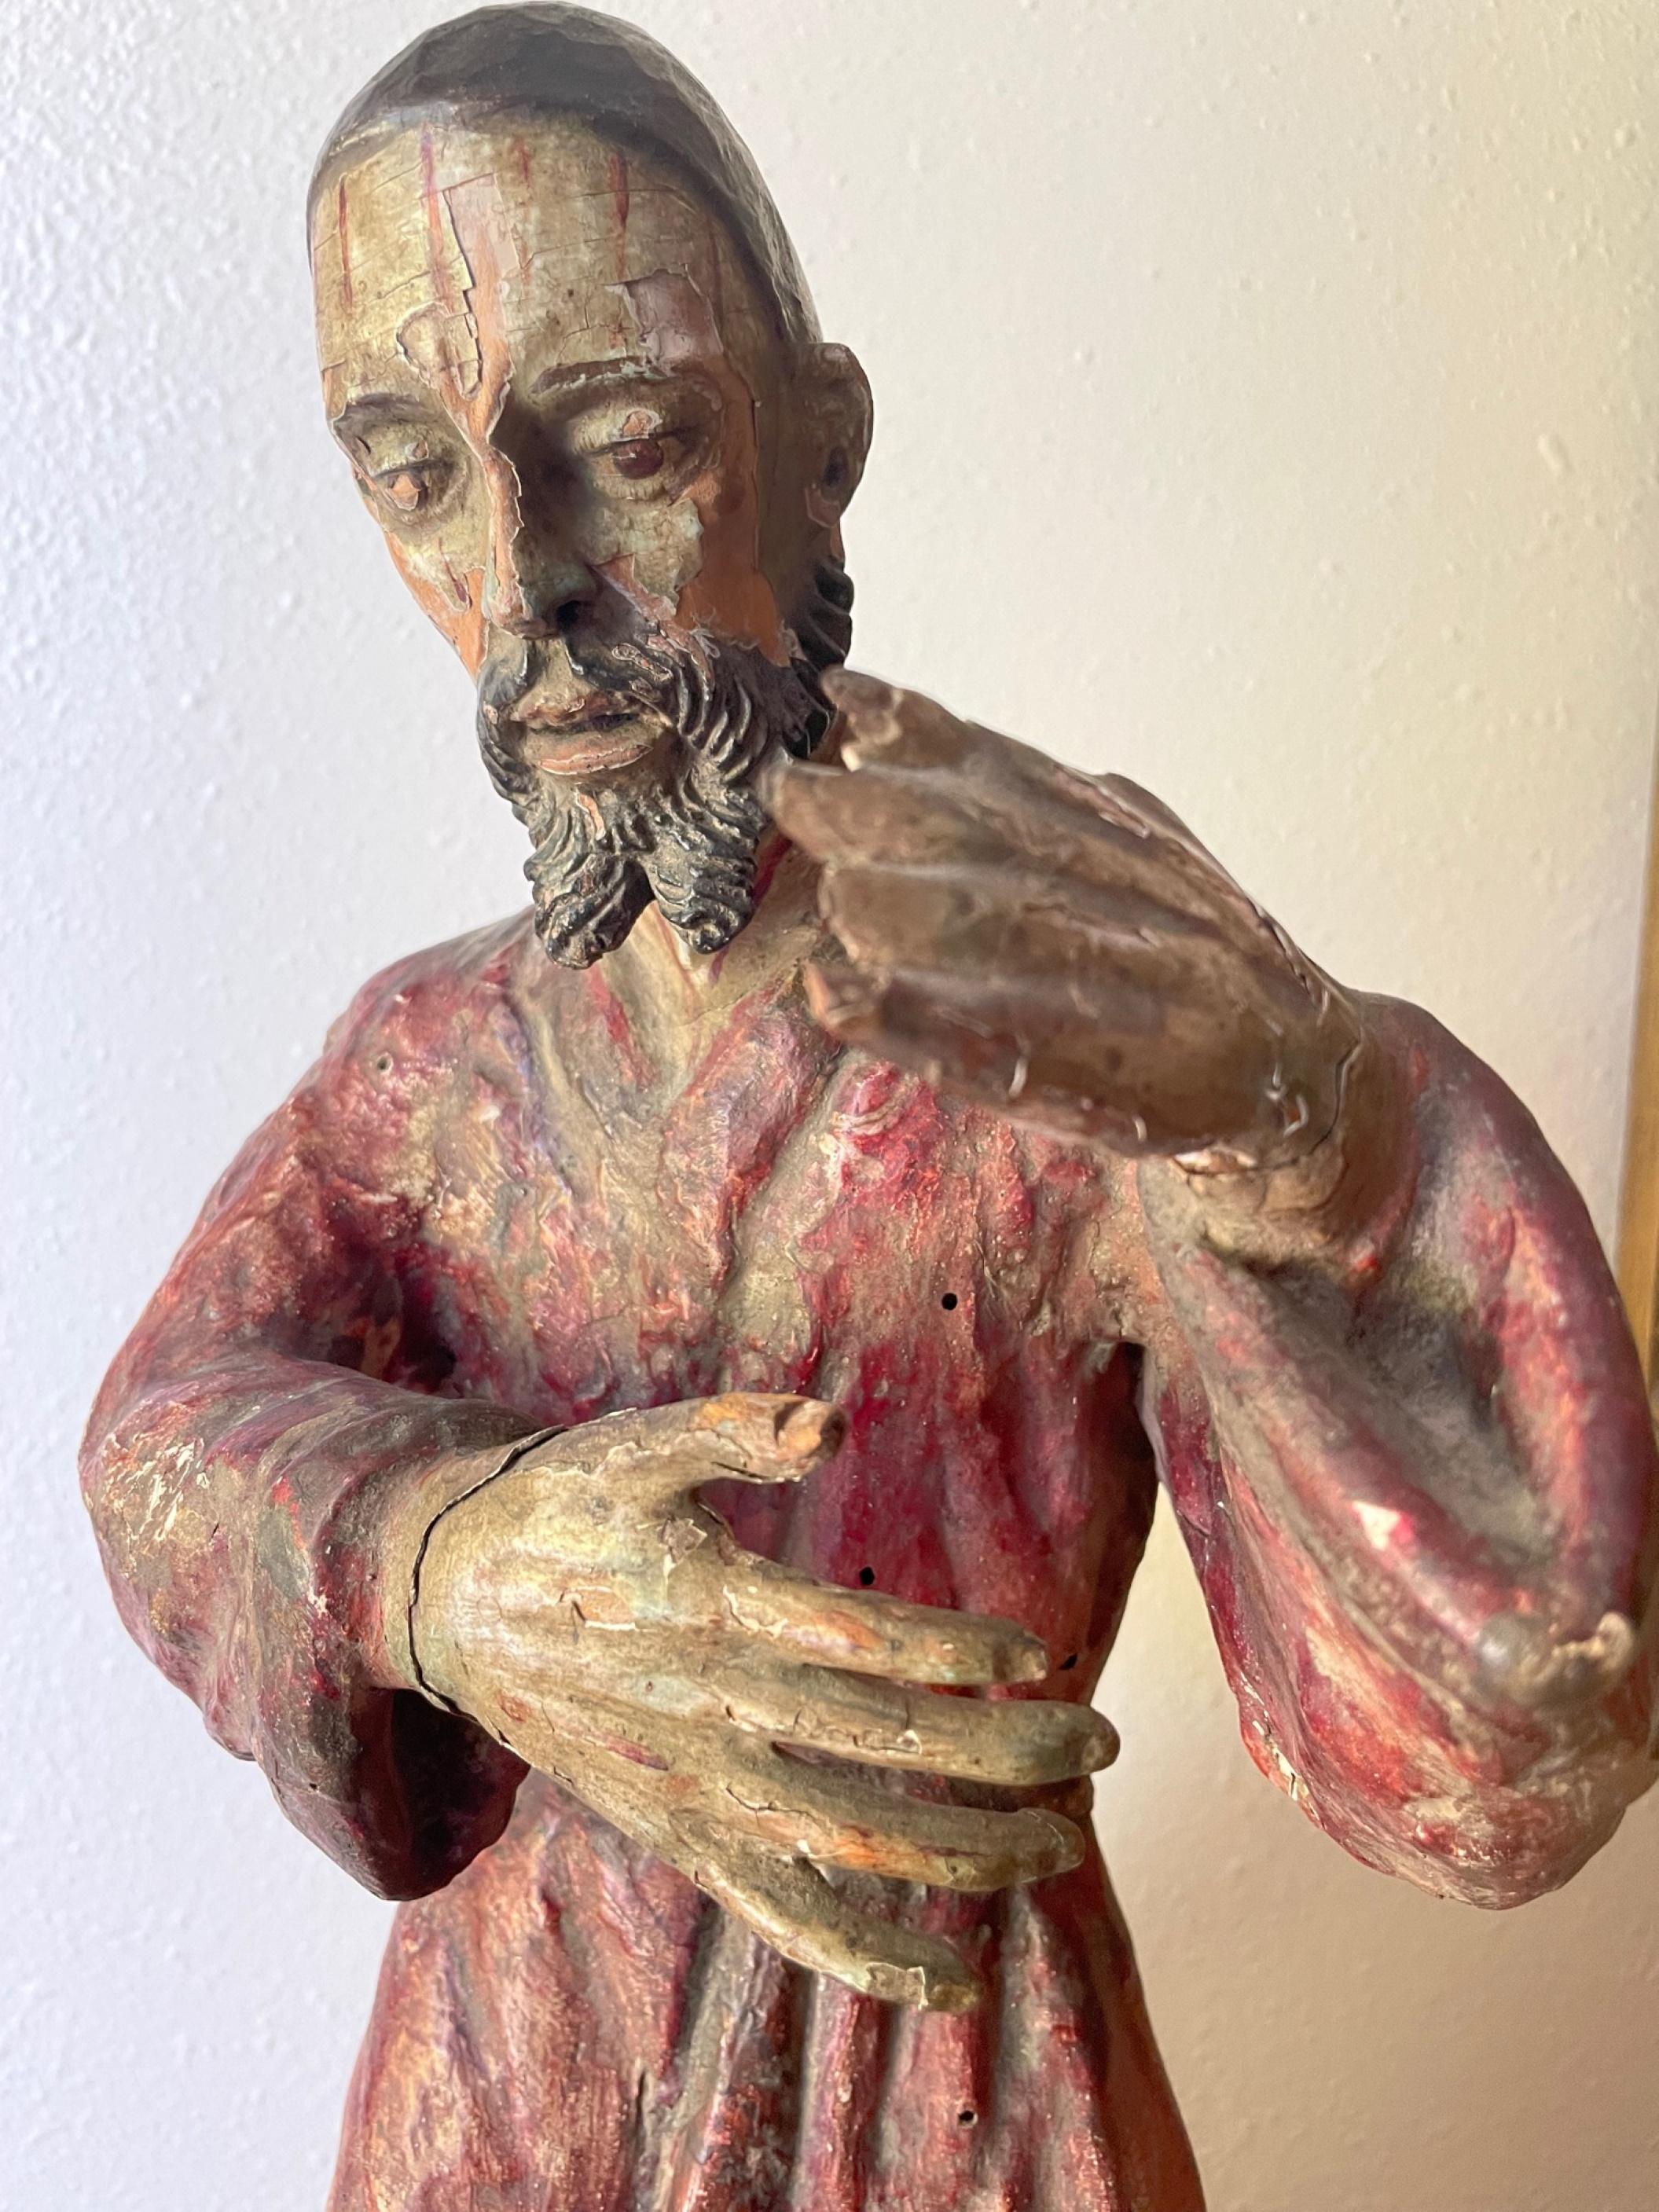 Hand-Carved Late 18th Century Carved and Polychrome Italian Santo Statue